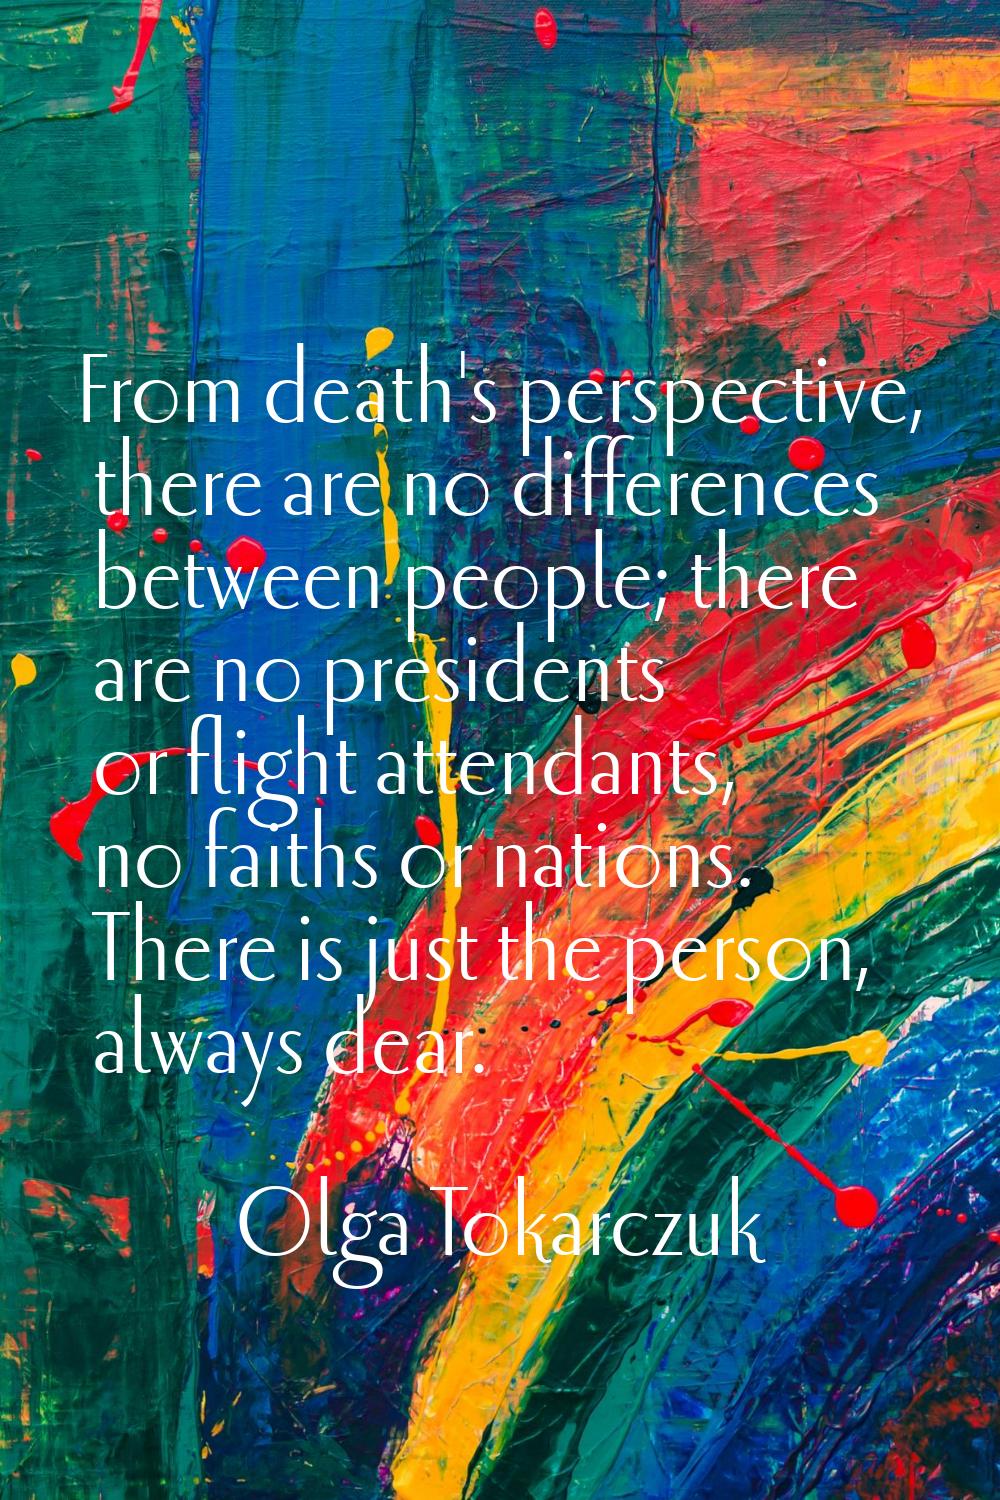 From death's perspective, there are no differences between people; there are no presidents or fligh